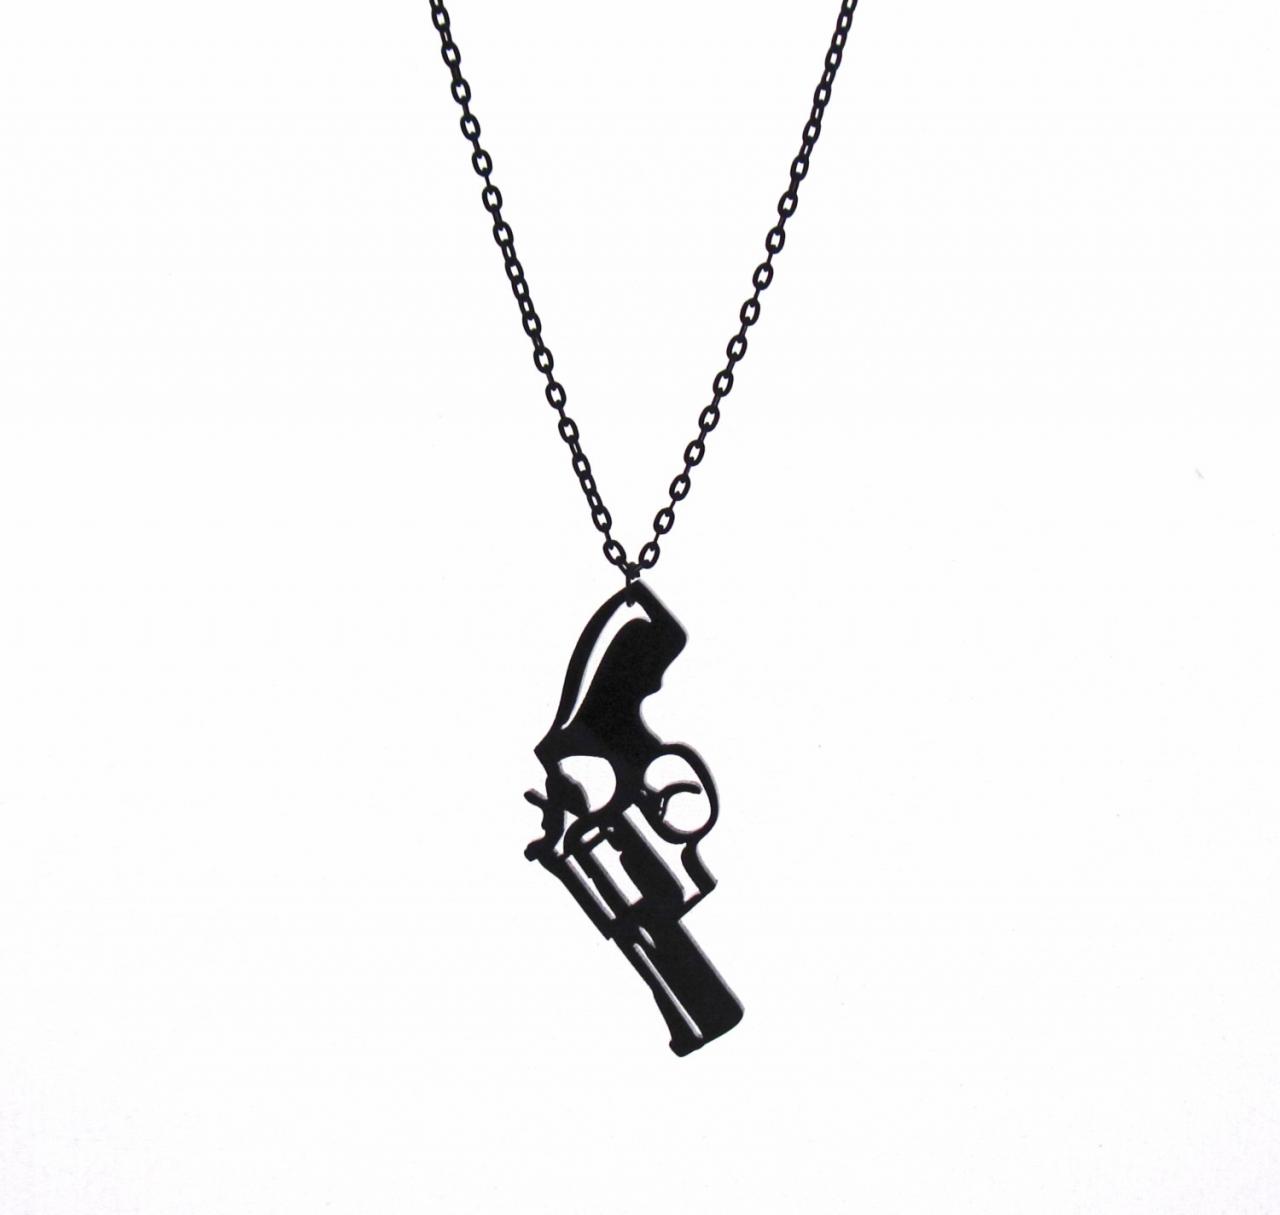 A Pistol Pendant Long Necklace - Gun Jewelry - Cowgirl Jewelry - Revolver Necklace - Cowboy Necklace - Army Necklace - Weapon Jewelry